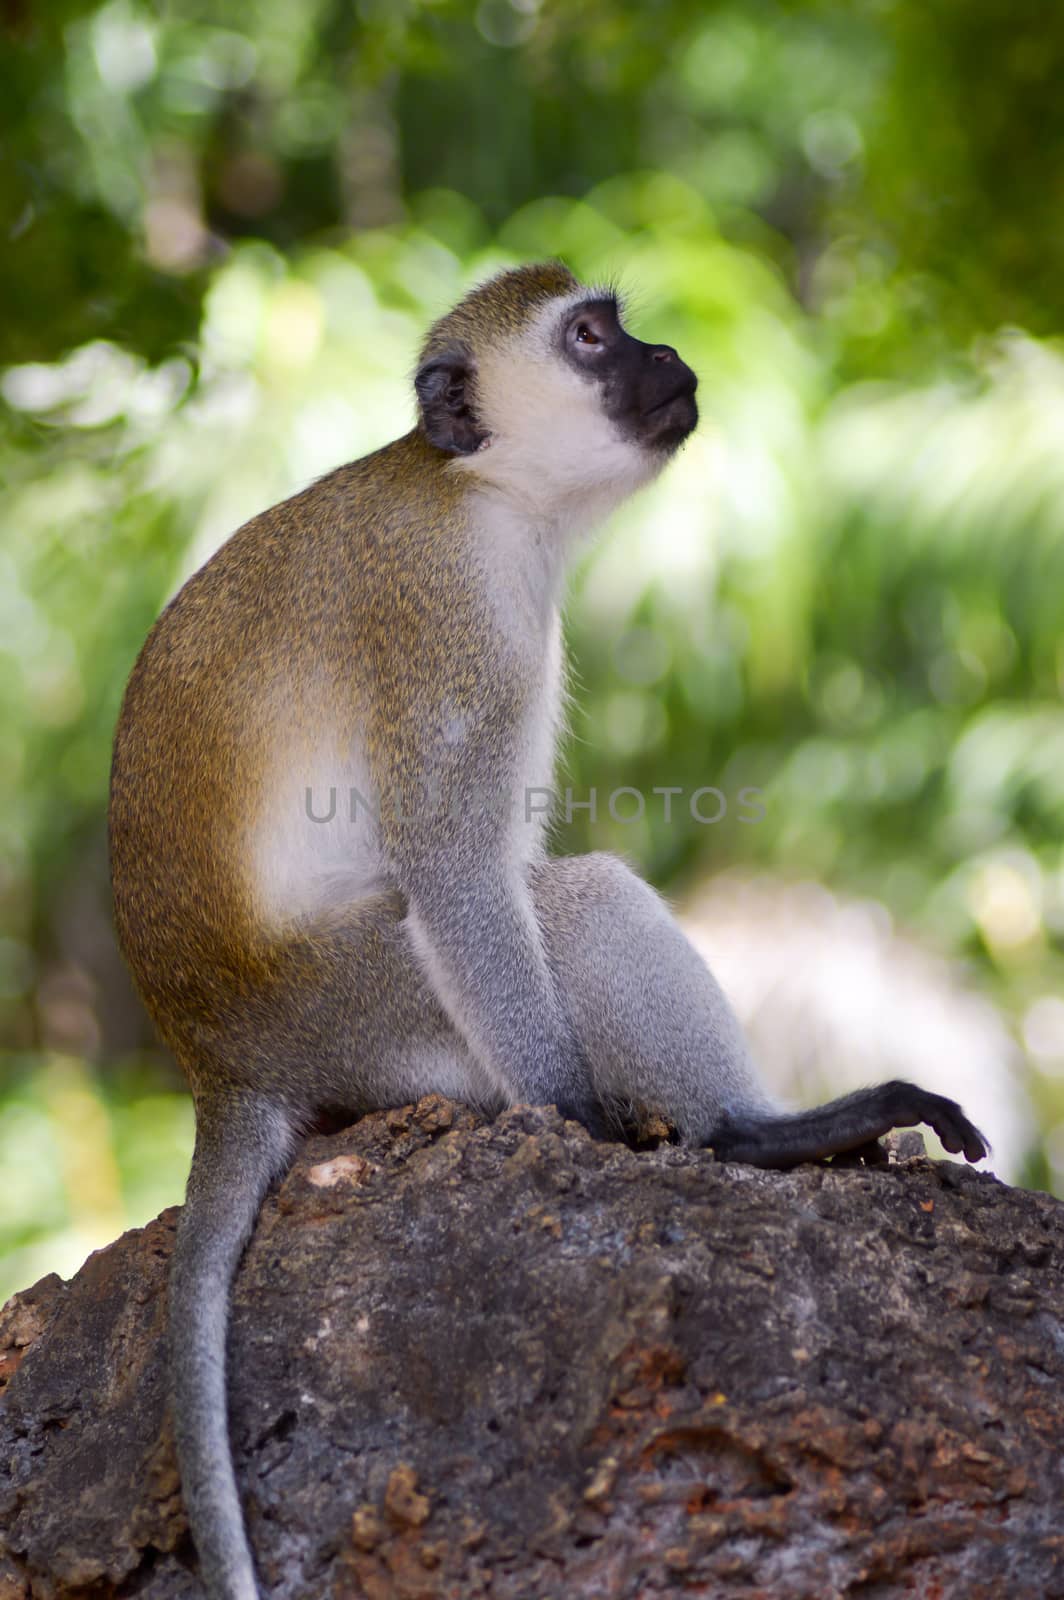 Monkey vervet posed on a rock looking up at a park in Mombasa, Kenya